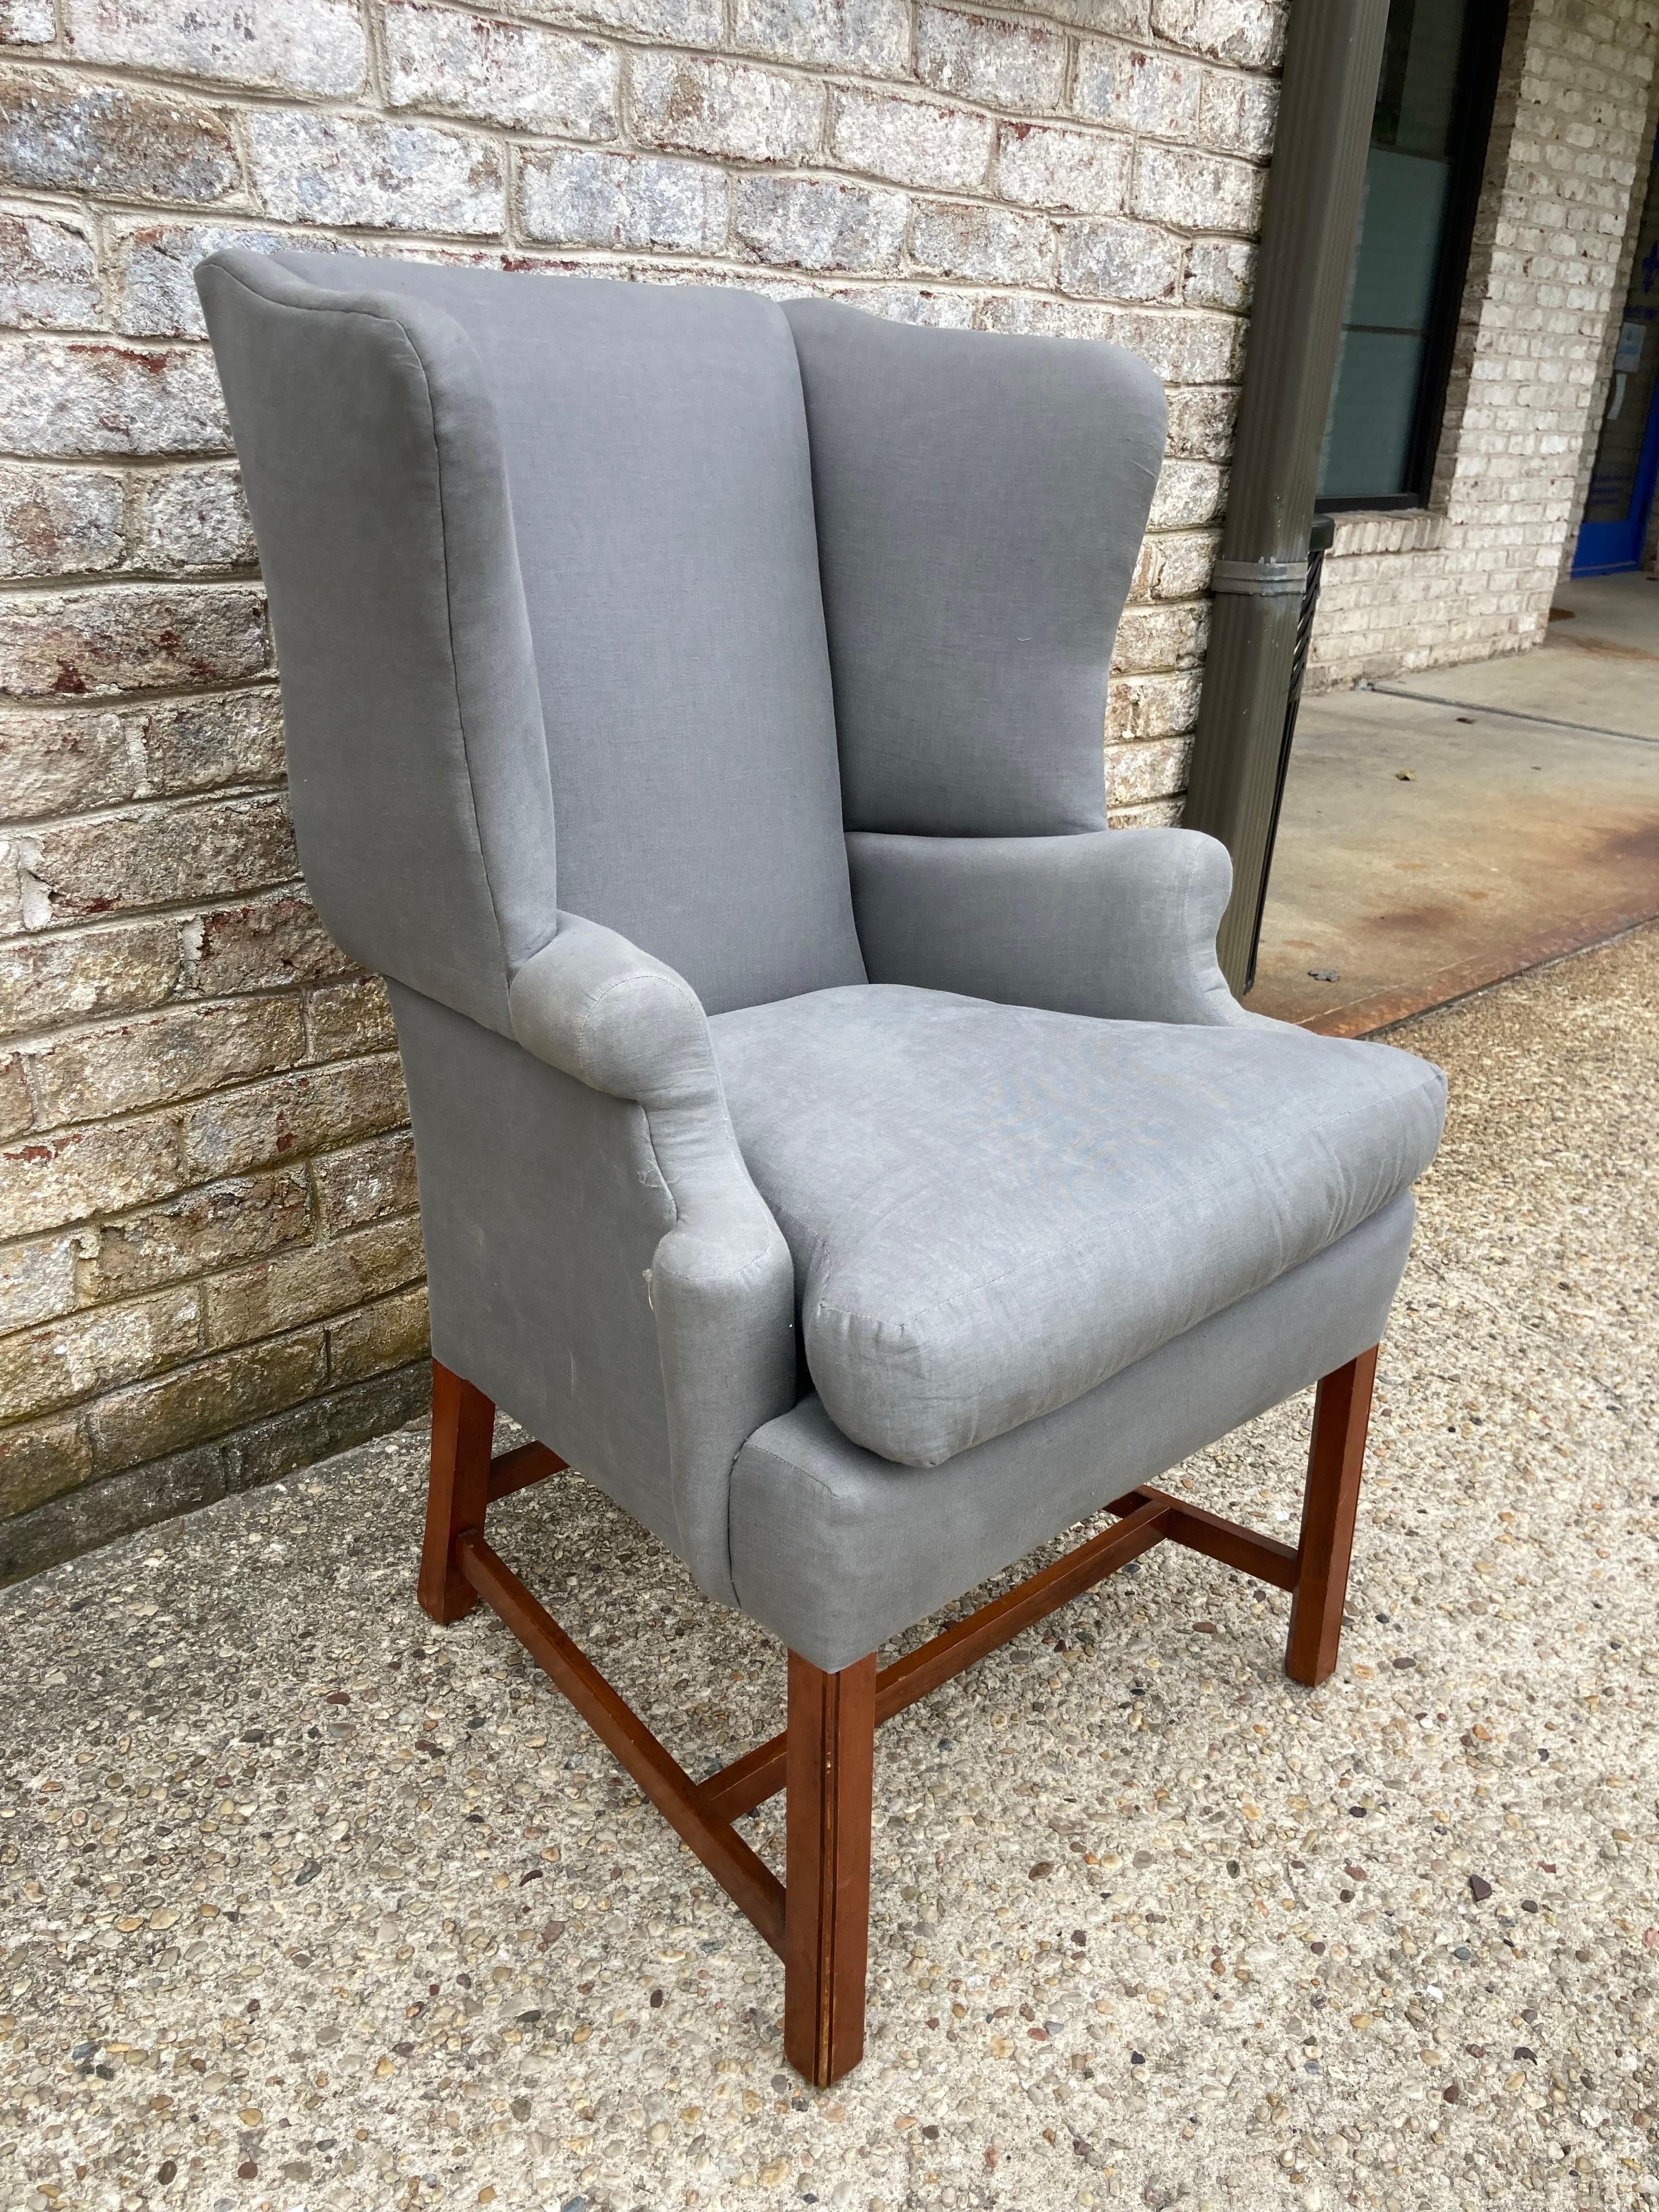 Very special petite Georgian style wingback chair newly upholstered in grey linen.